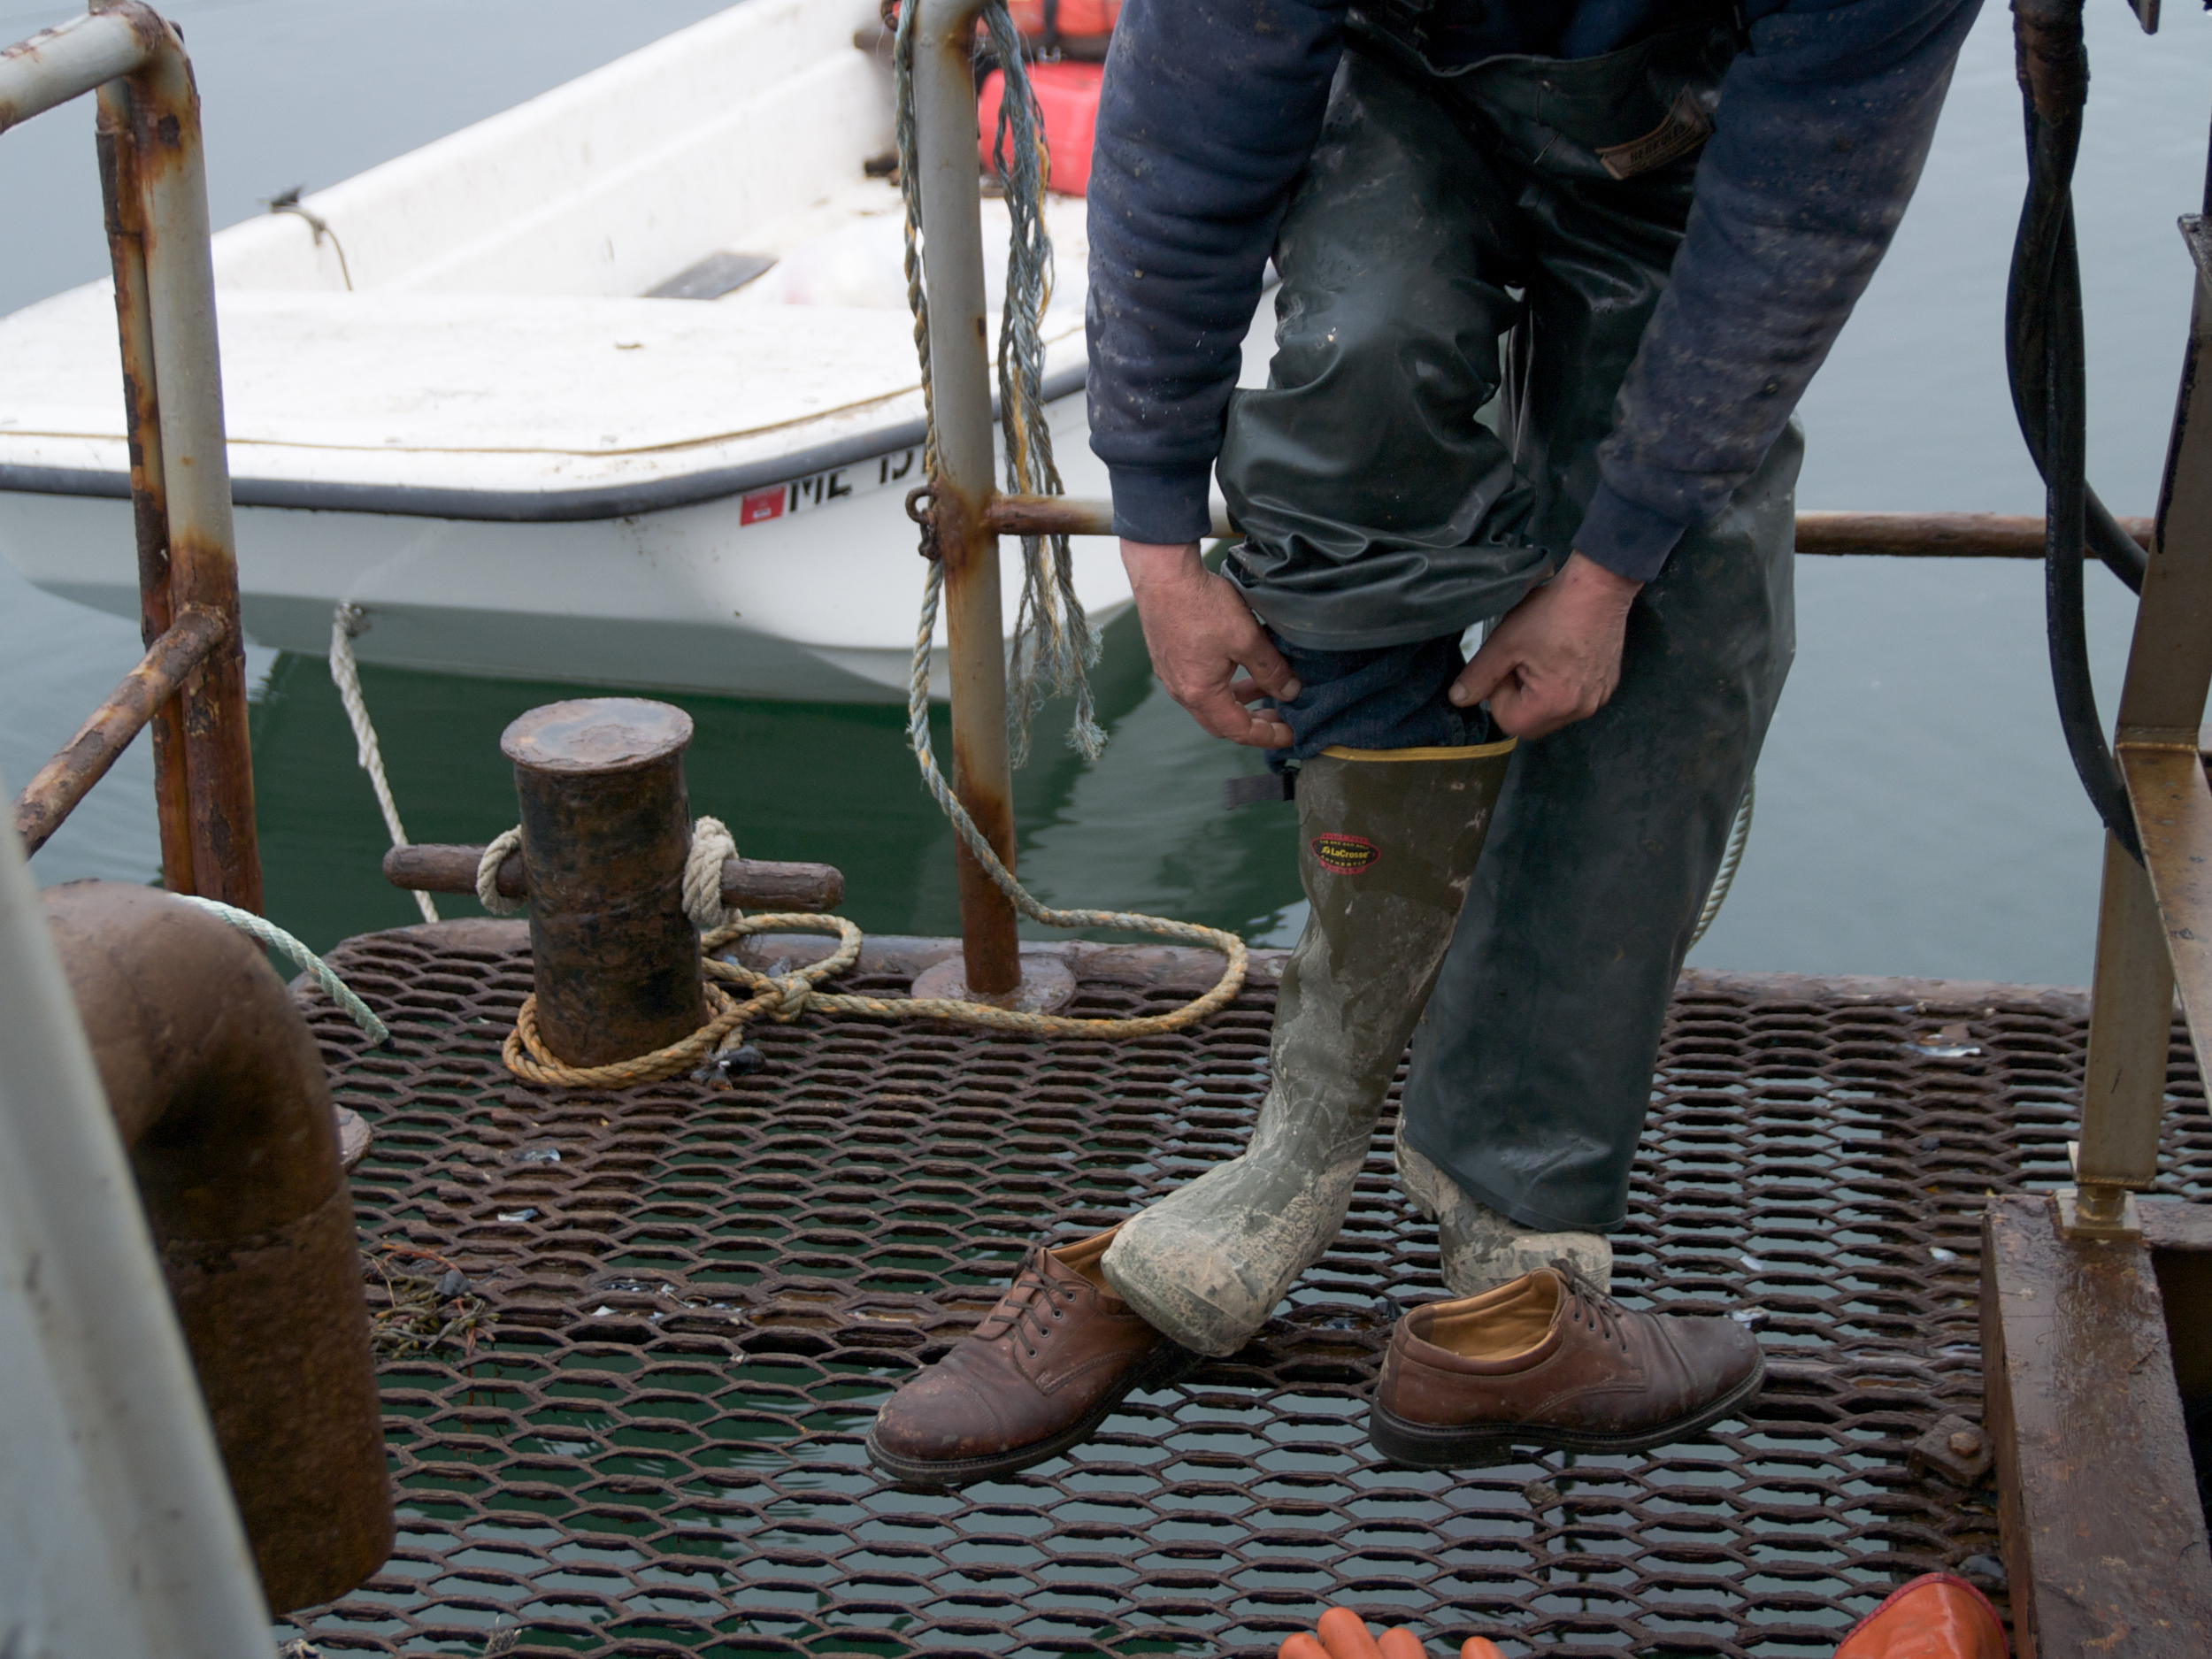  (04/04/09)&nbsp;Cater Newell pulls on a pair of boots. Rubber overalls and rubber boots are needed before getting to work on the barge. The job is a messy one and the crew have have to be prepared to work in all kinds of weather. In rough weather, w